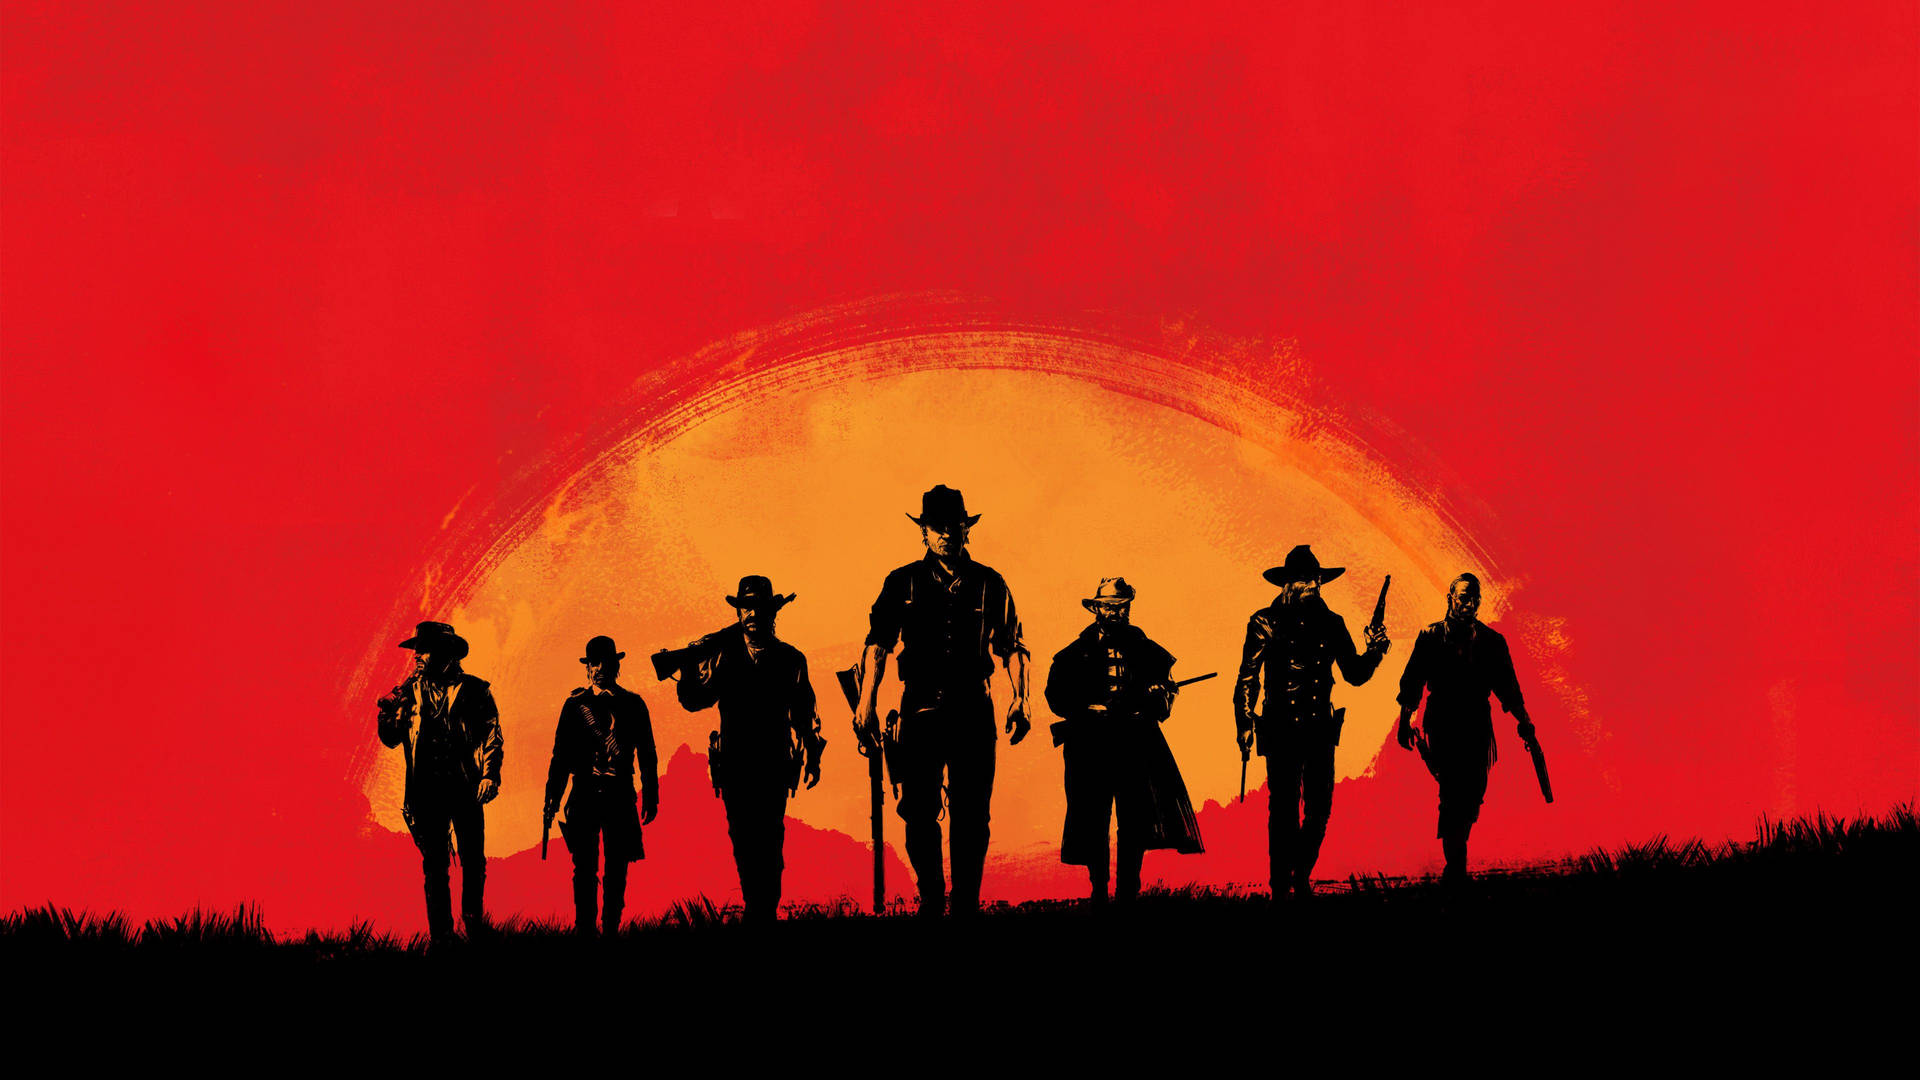 Red Dead Redemption Characters 4k Ps4 Background